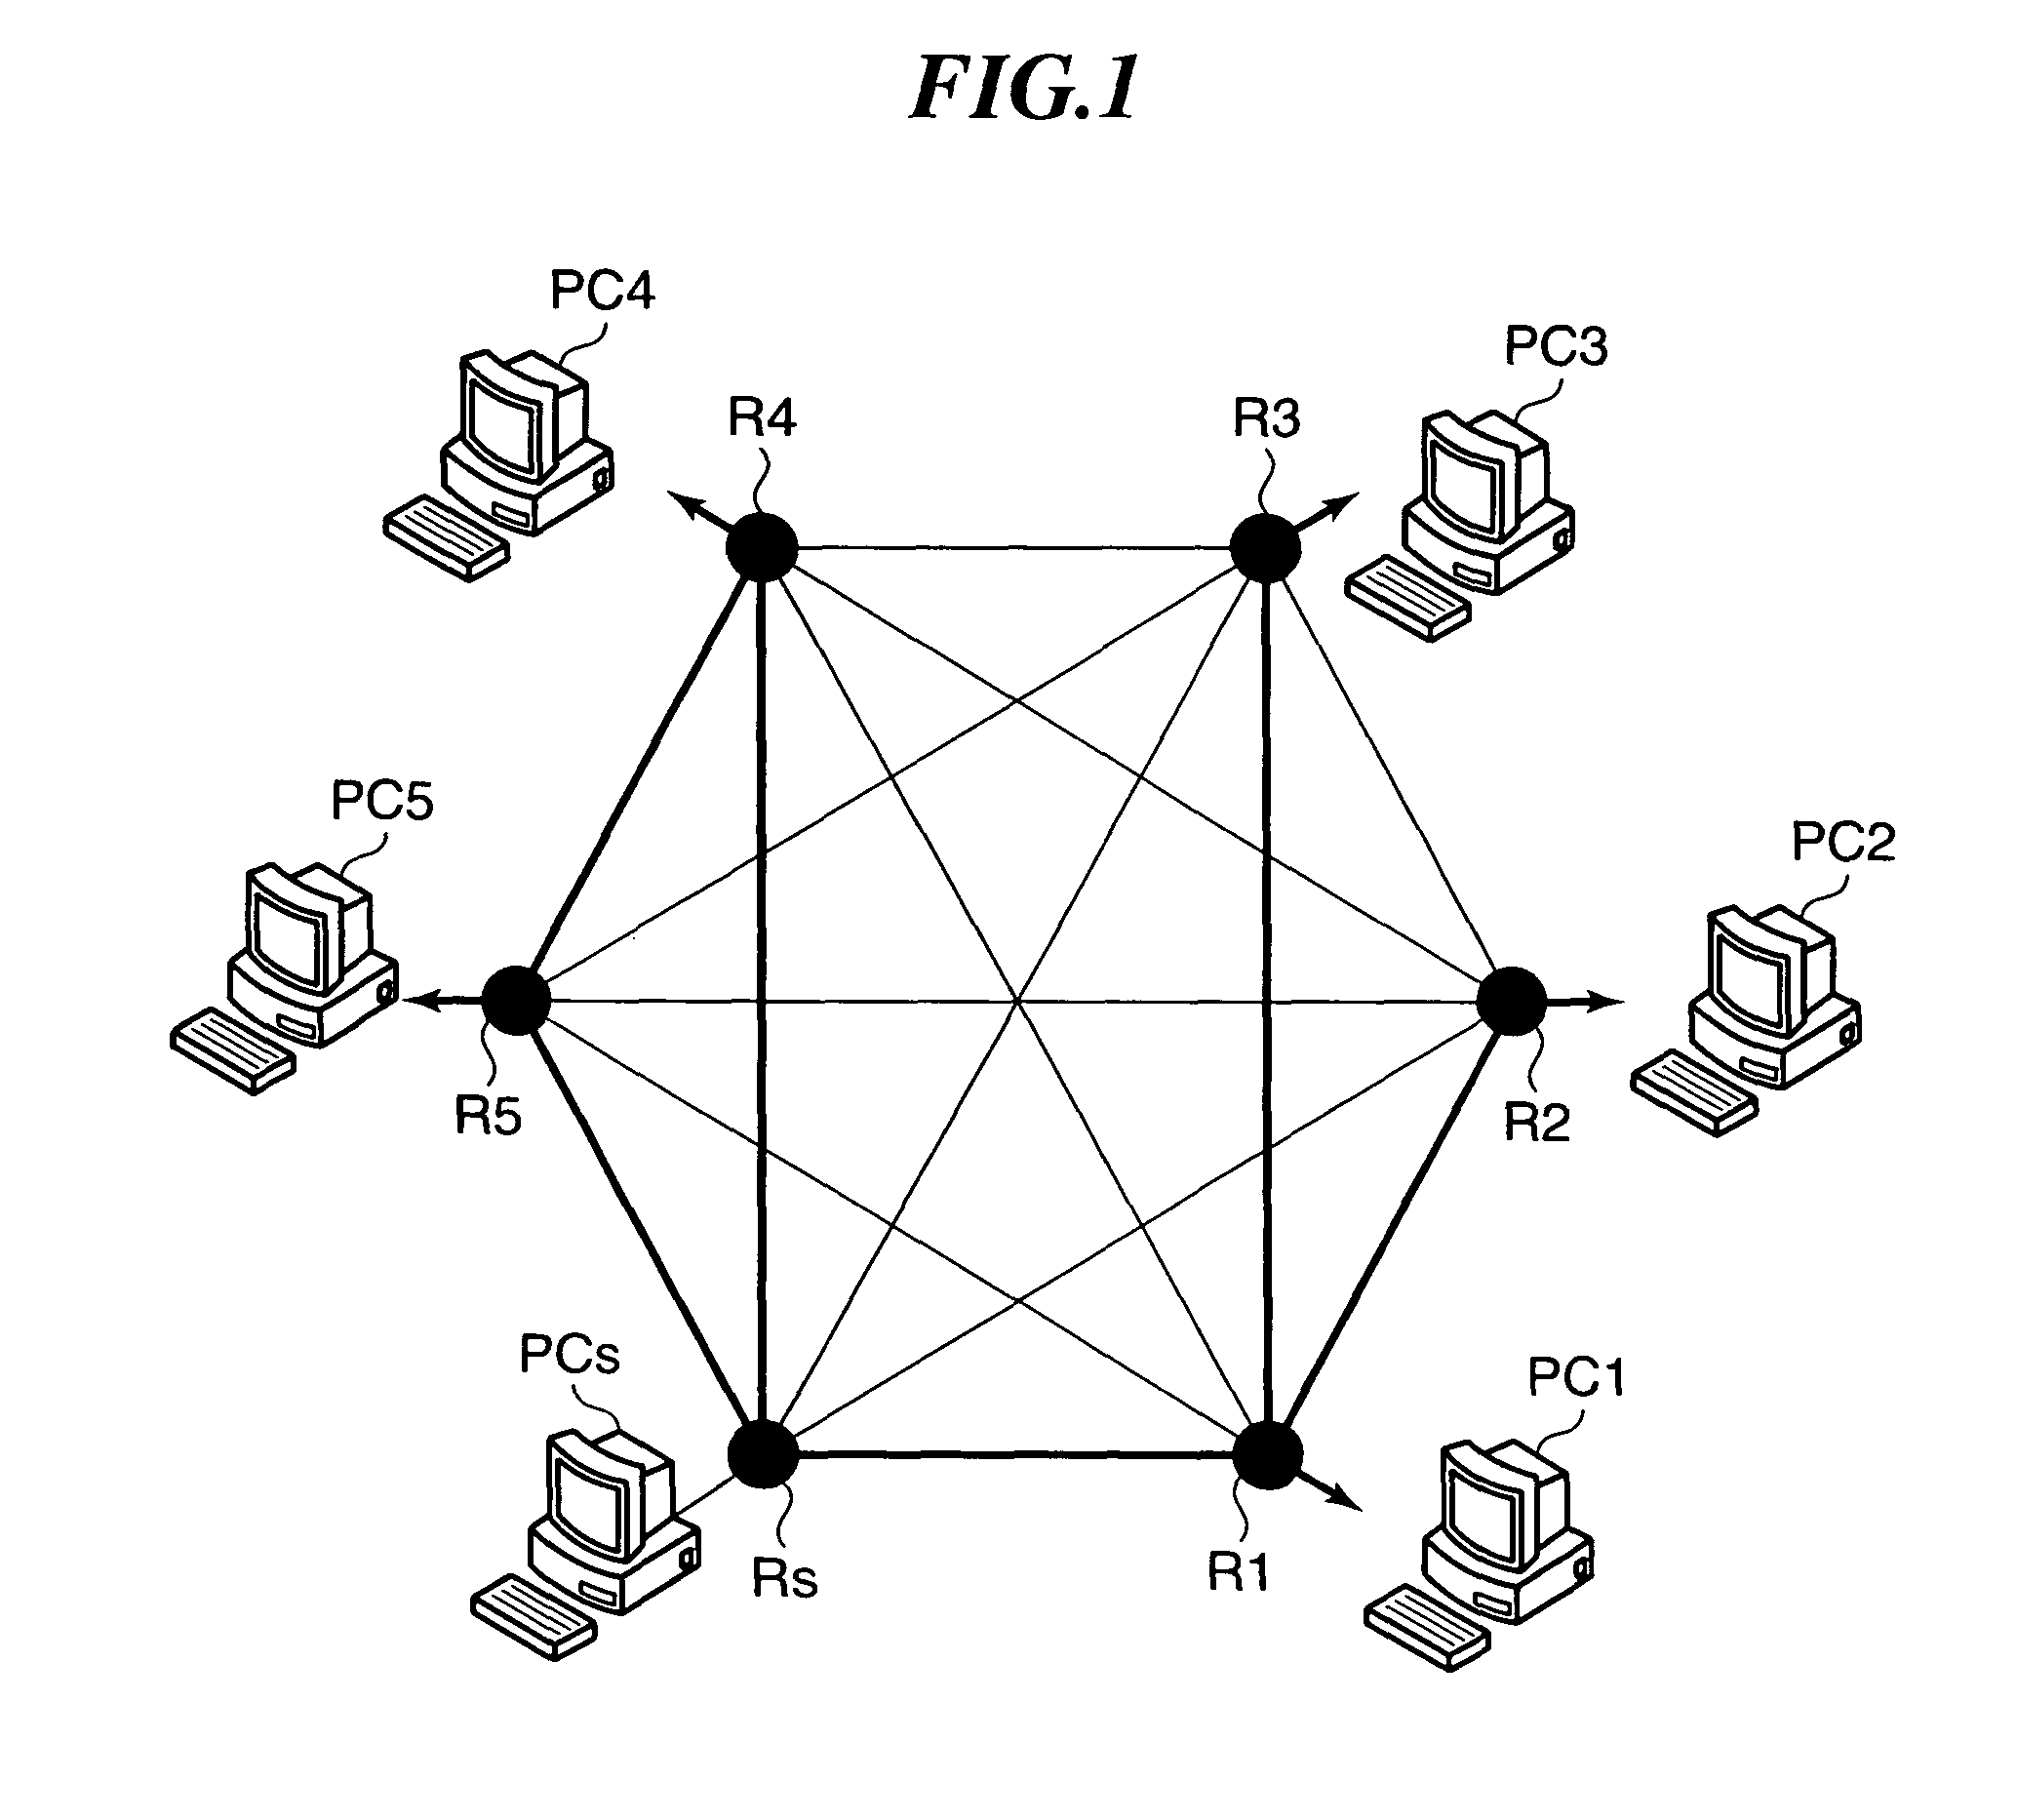 Multicast distribution system and method for distributing data on a mesh virtual network